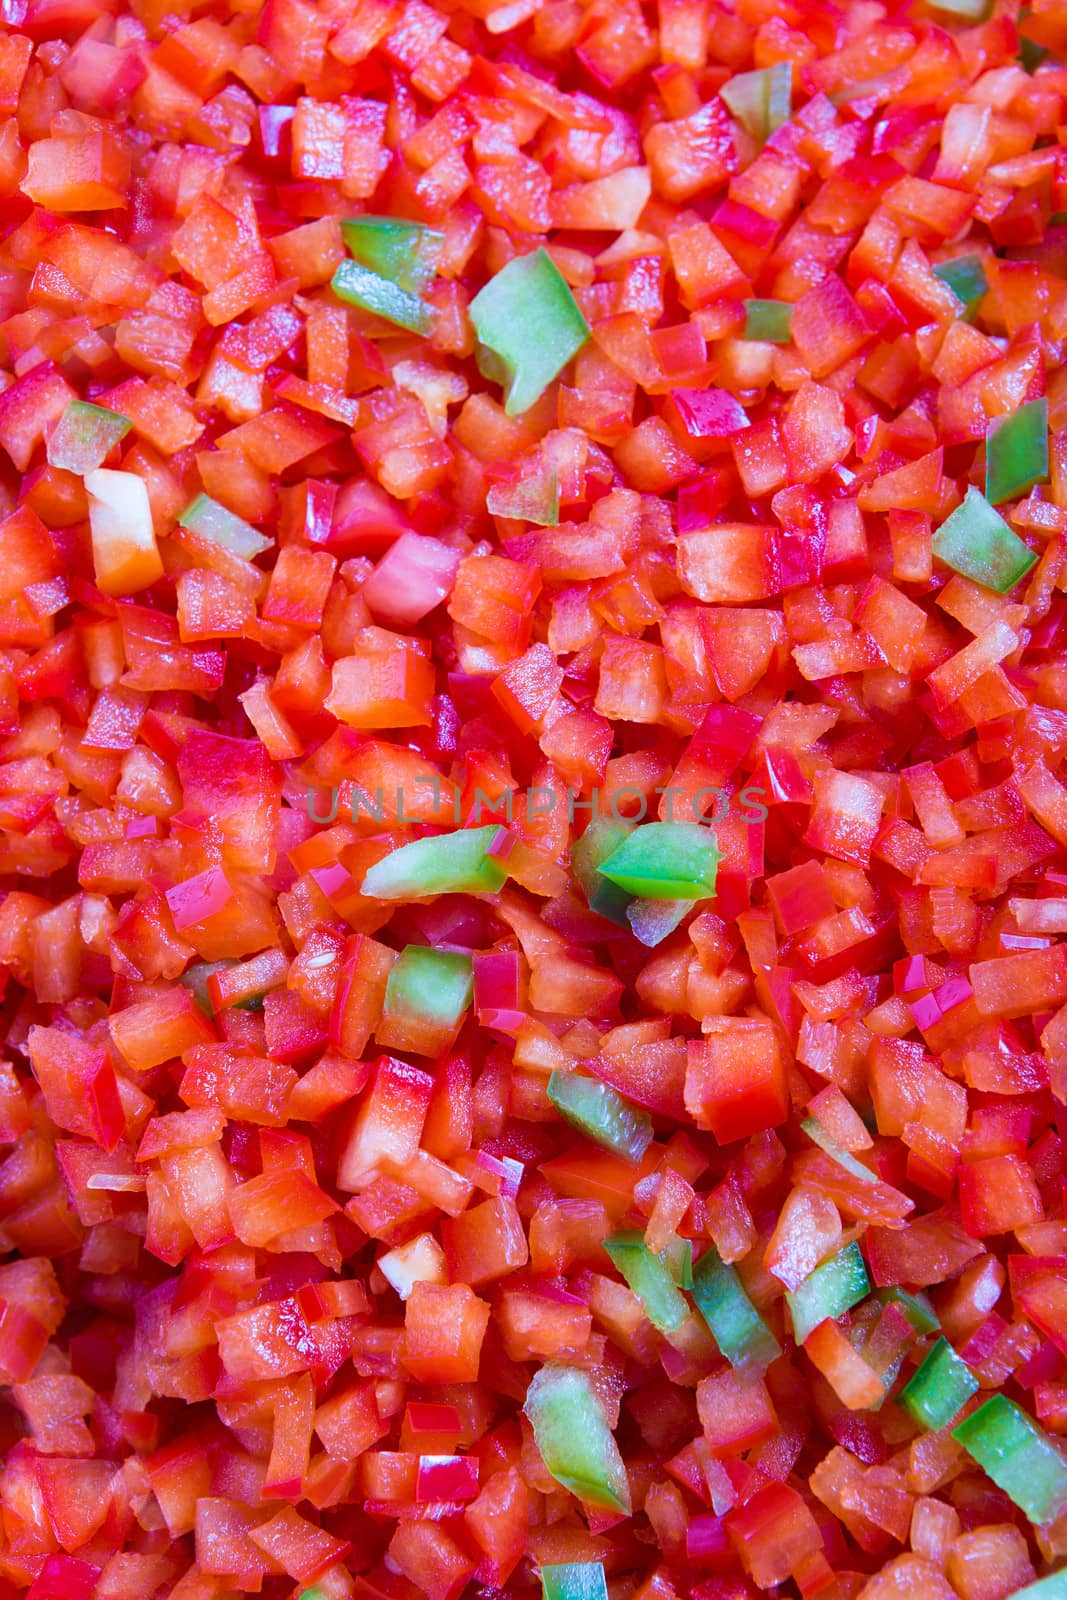 Red and some green belll peppers cleaned and washed as cooking Ingredient in the restaurant, background